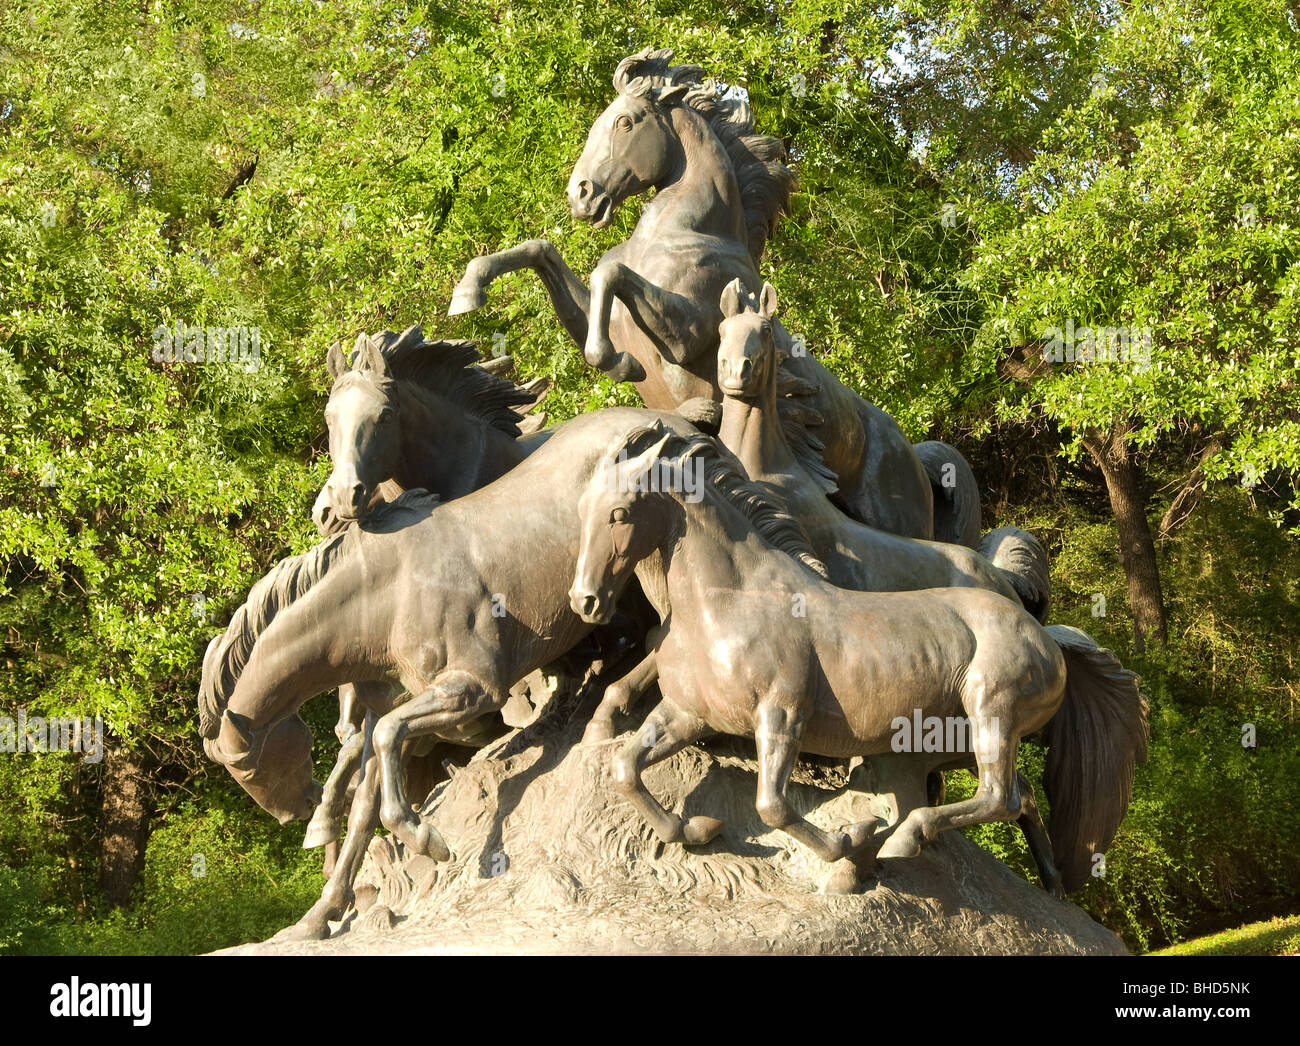 'The Mustangs' sculpture by Alexander Proctor at University of Texas campus in Austin, Texas Stock Photo